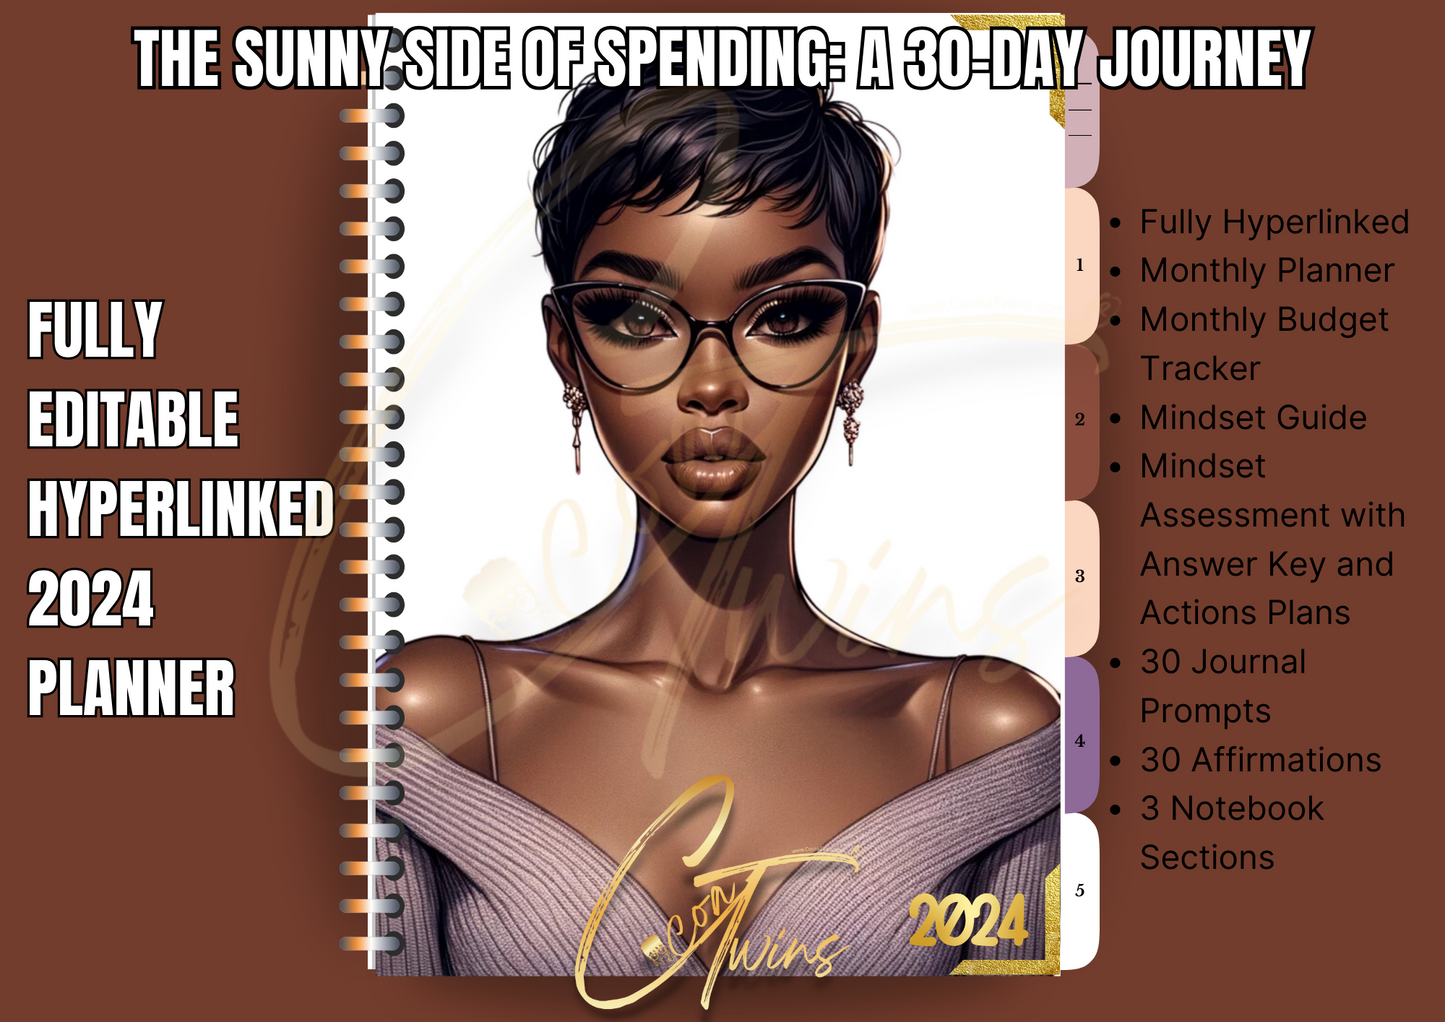 The Sunny Side of Spending - A 30-Day Journey | PDF and Canva Template | Planner and Mindset Guide - ONE BUYER PLR